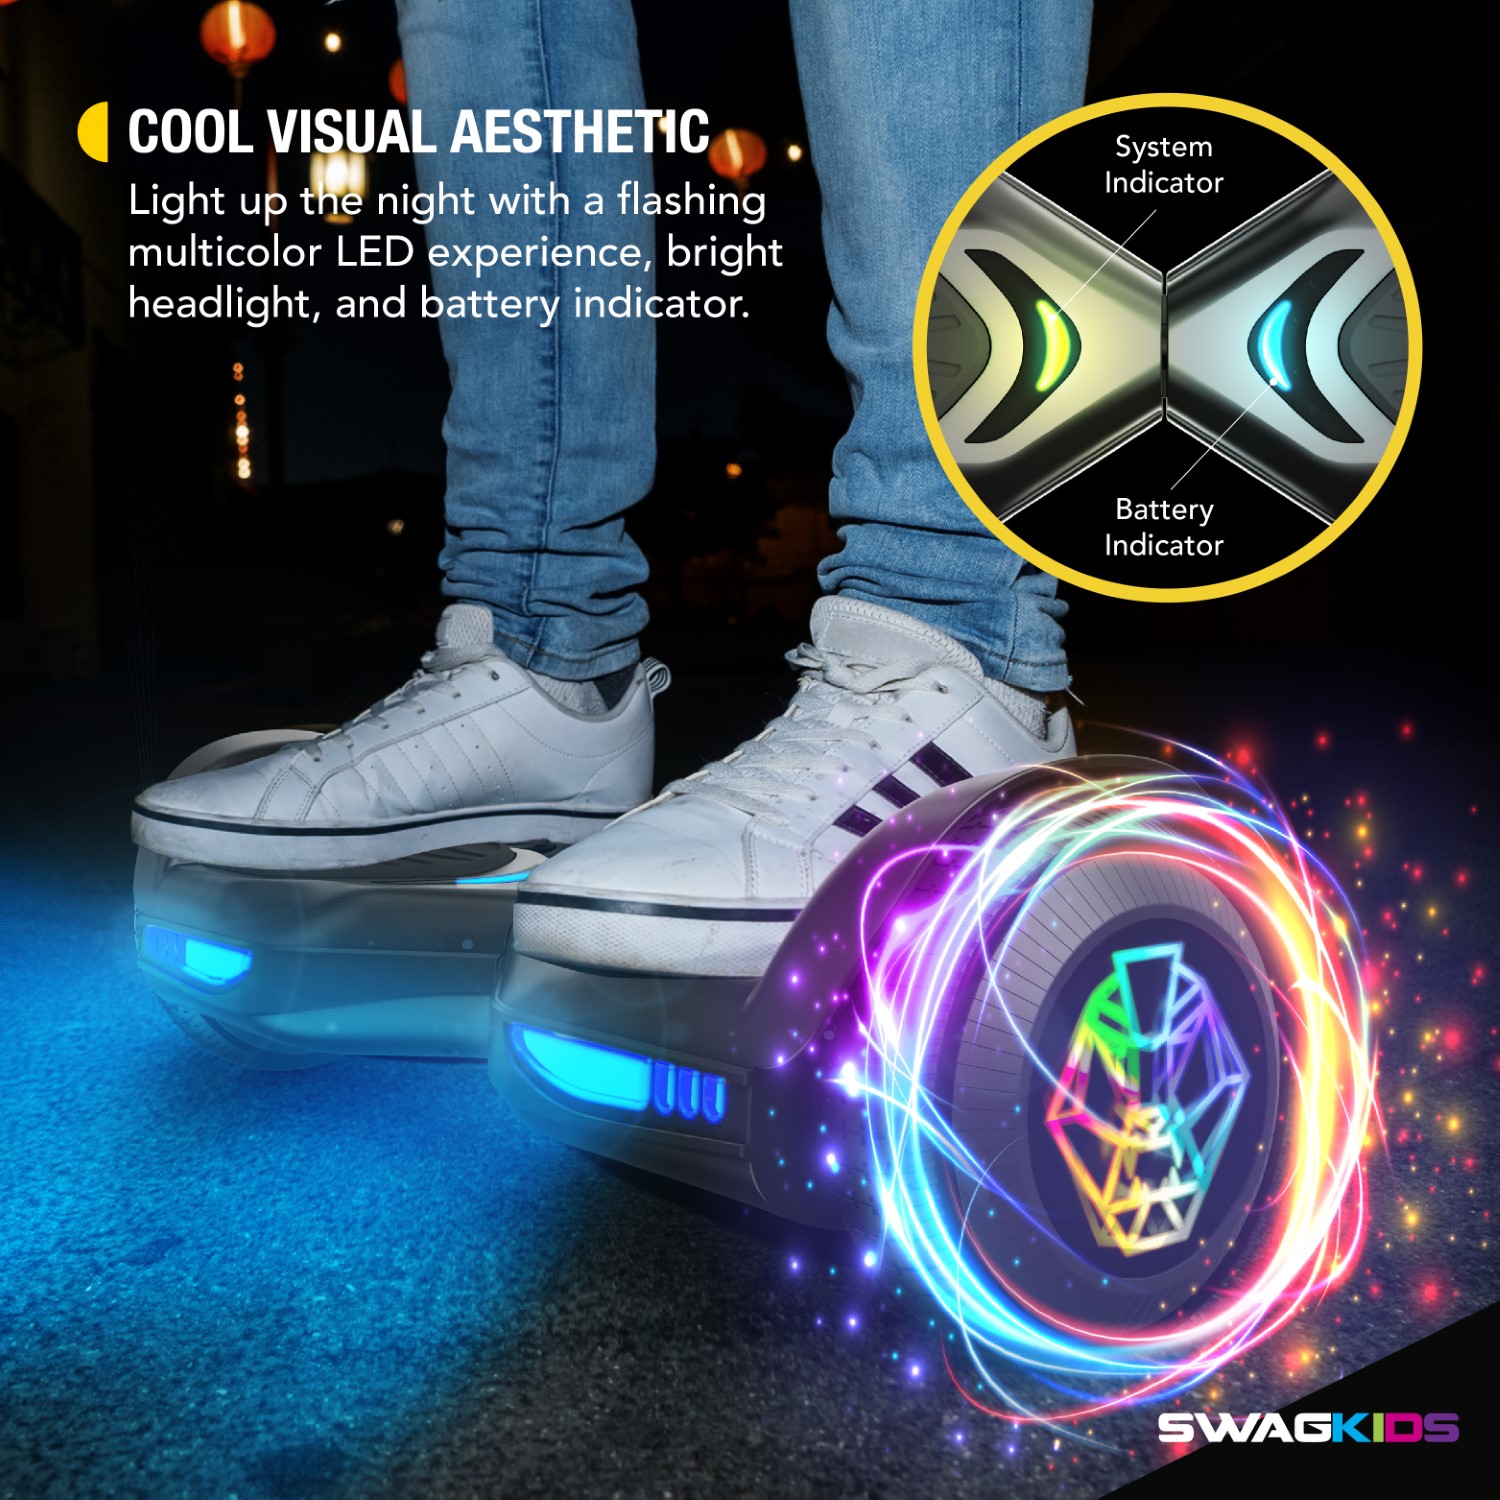 Swagtron Multicolor SwagBOARD EVO Freestyle Hoverboard Bluetooth Speaker Light-Up Wheels, 7 MPH Max Speed - image 2 of 9